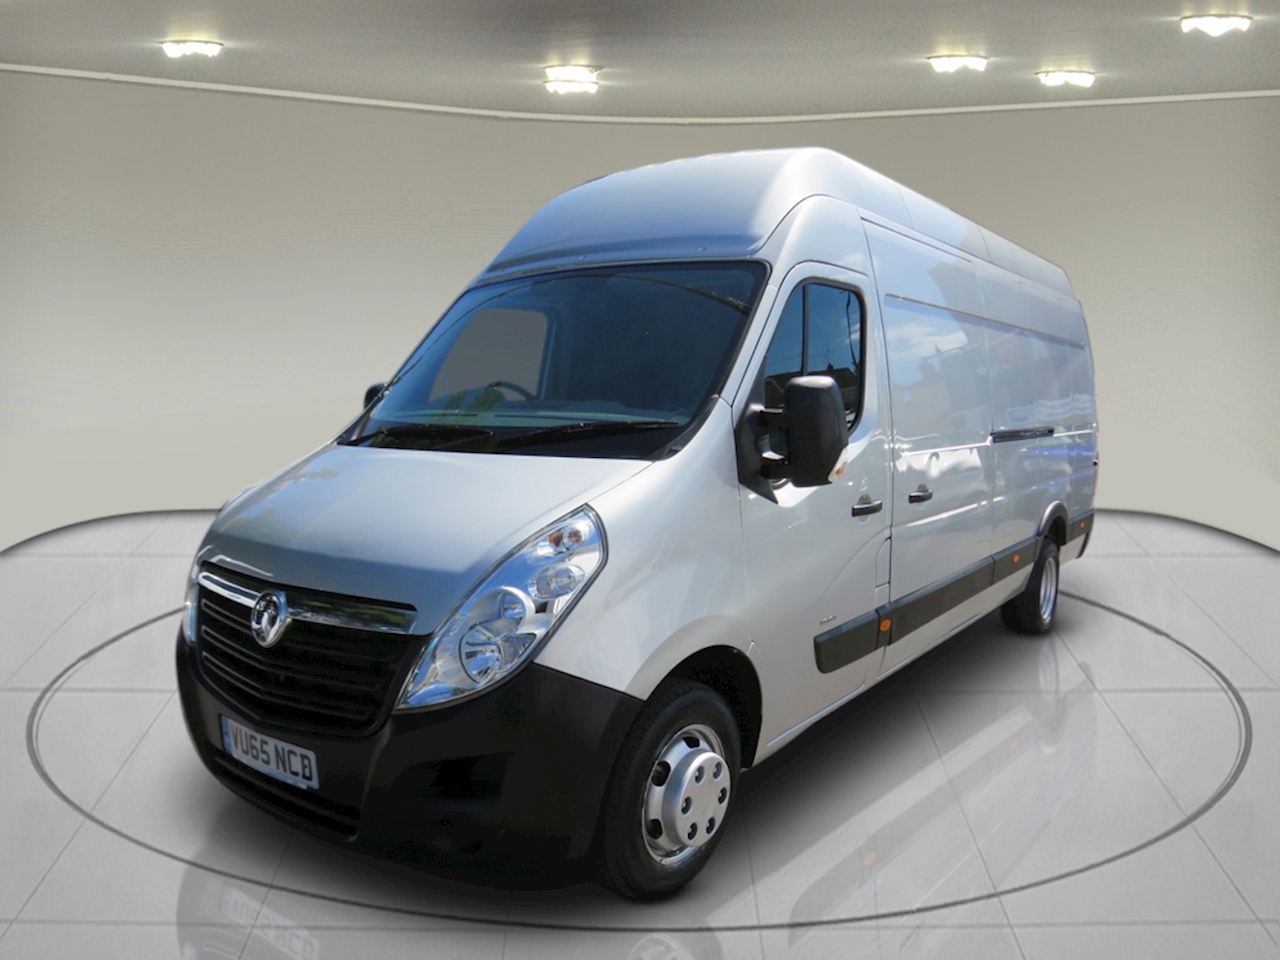 Used 2015 Vauxhall Movano R3500 L4h3 P/V Cdti Drw For Sale in Avon (U5048)